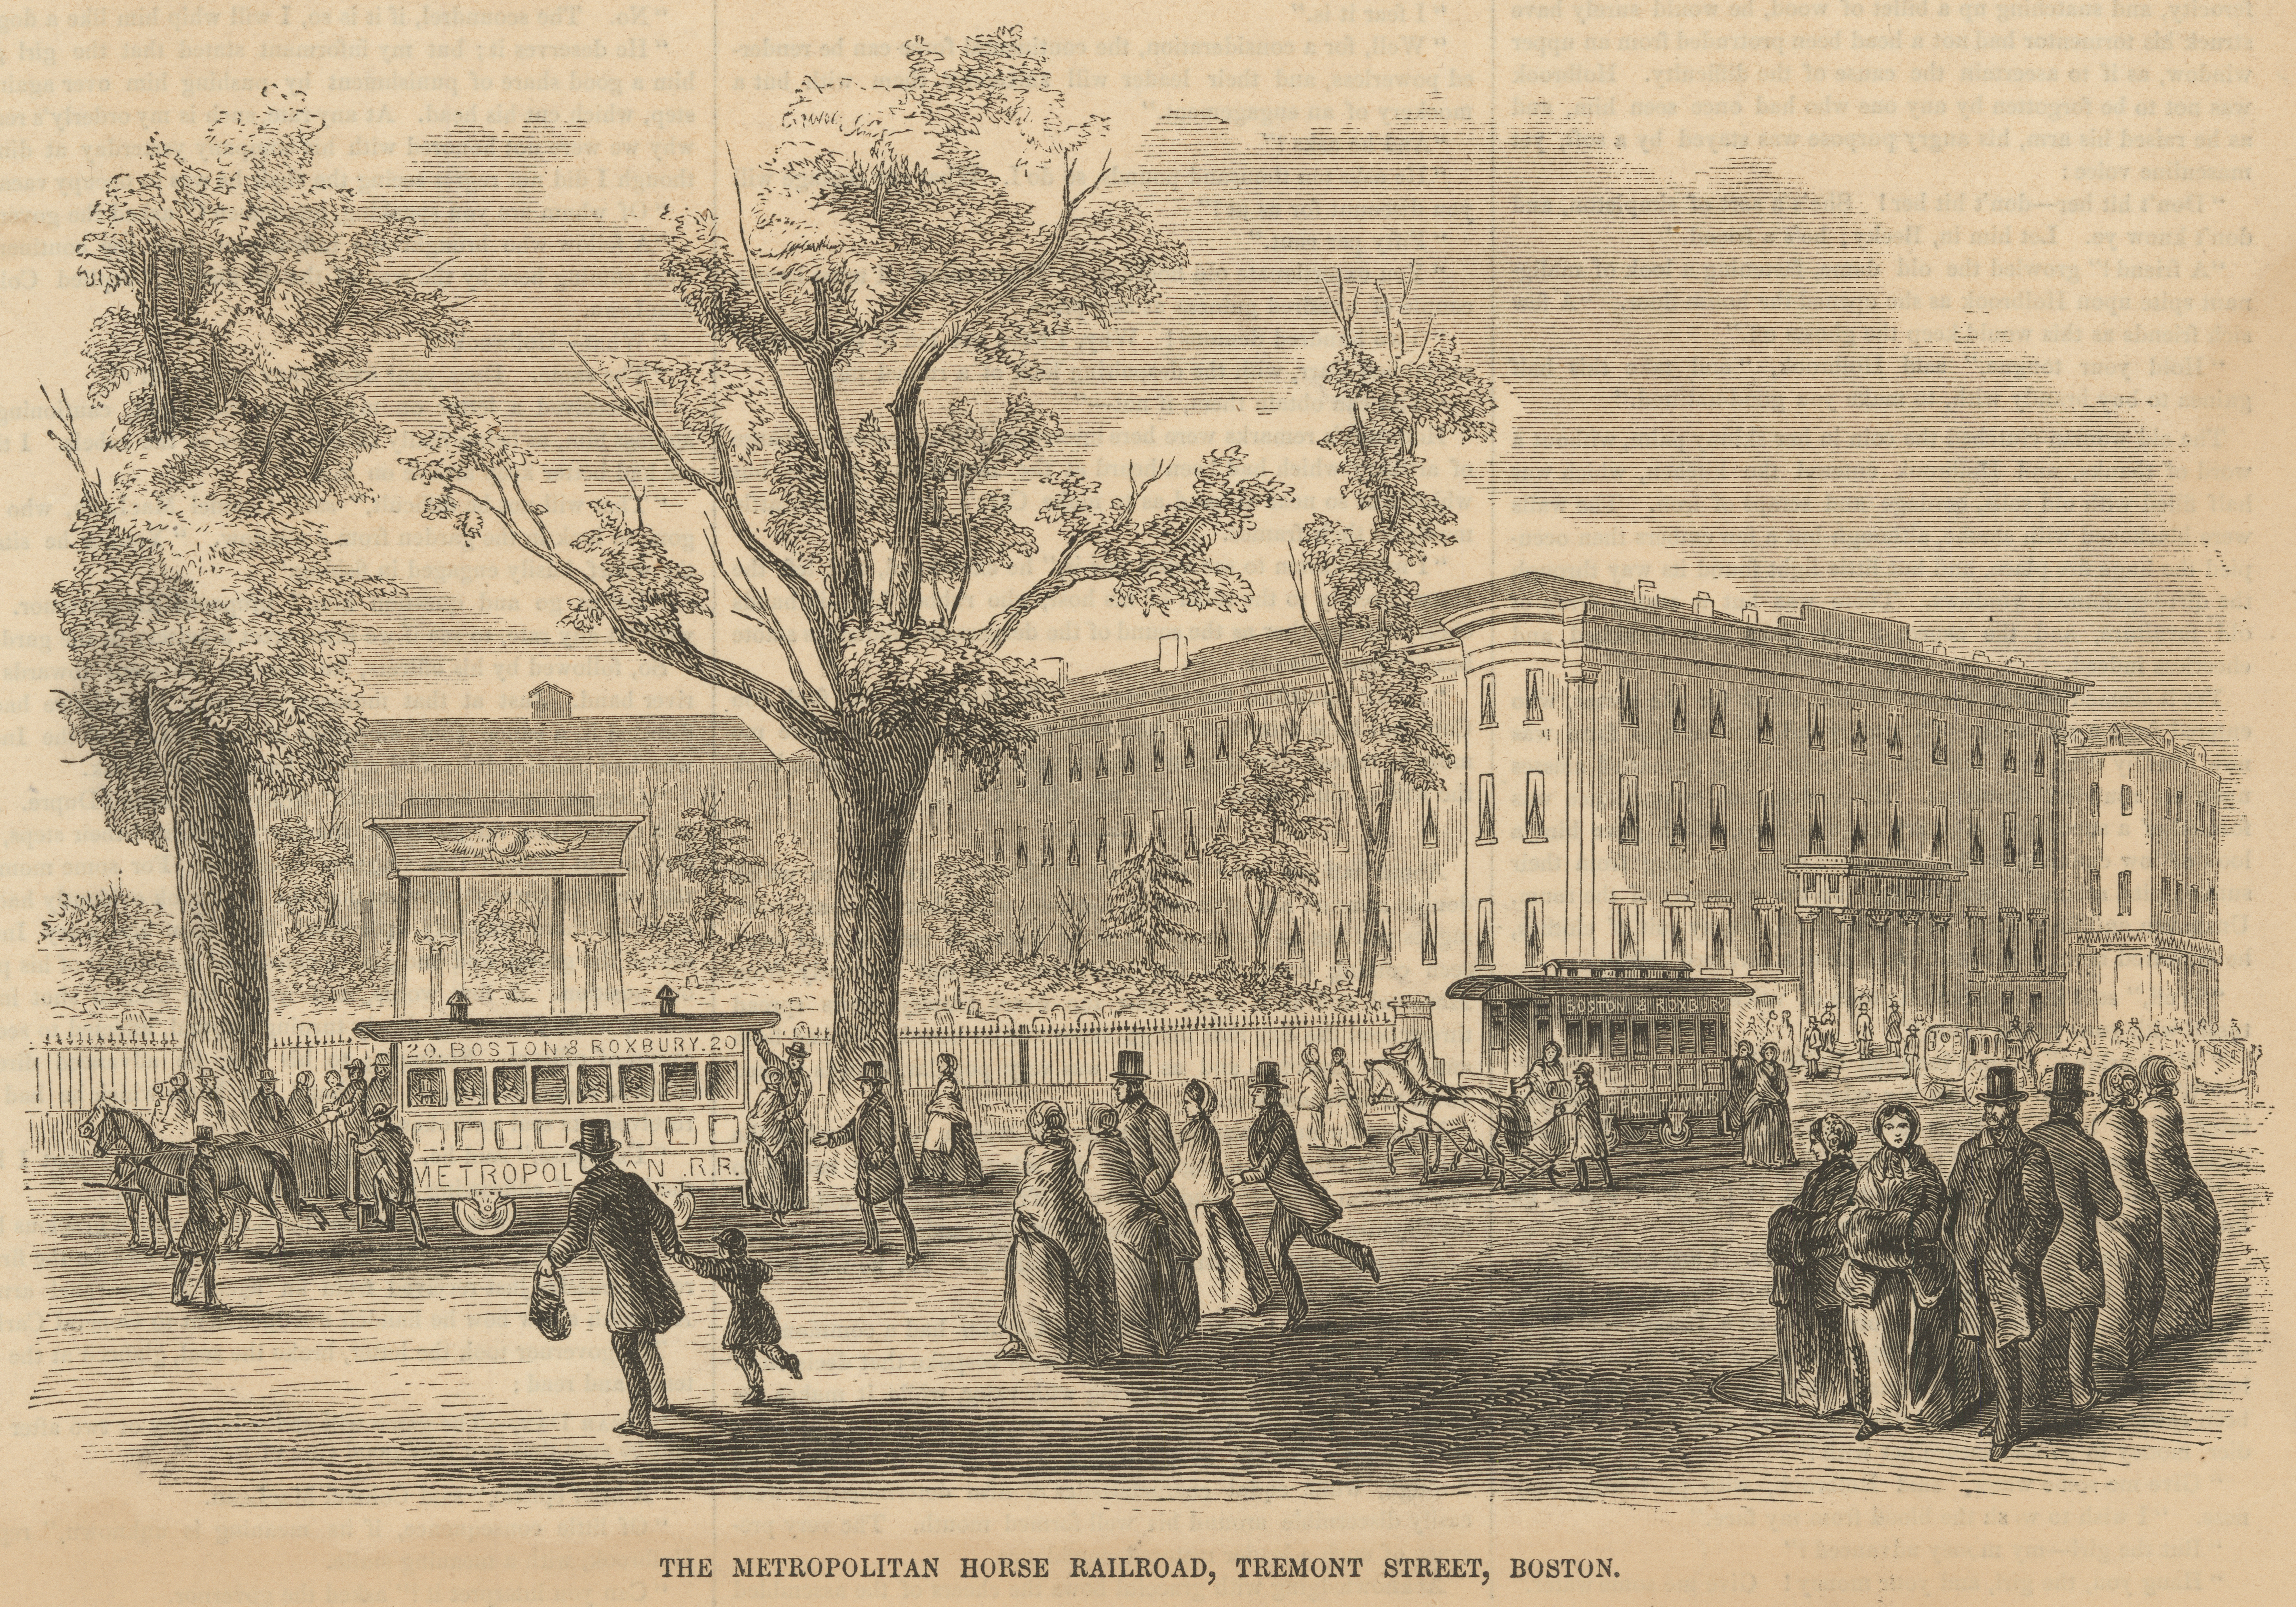 Image of “The Metropolitan Horse Railroad, Tremont Street, Boston” from December 13, 1856 issue of “Ballou’s Pictorial”